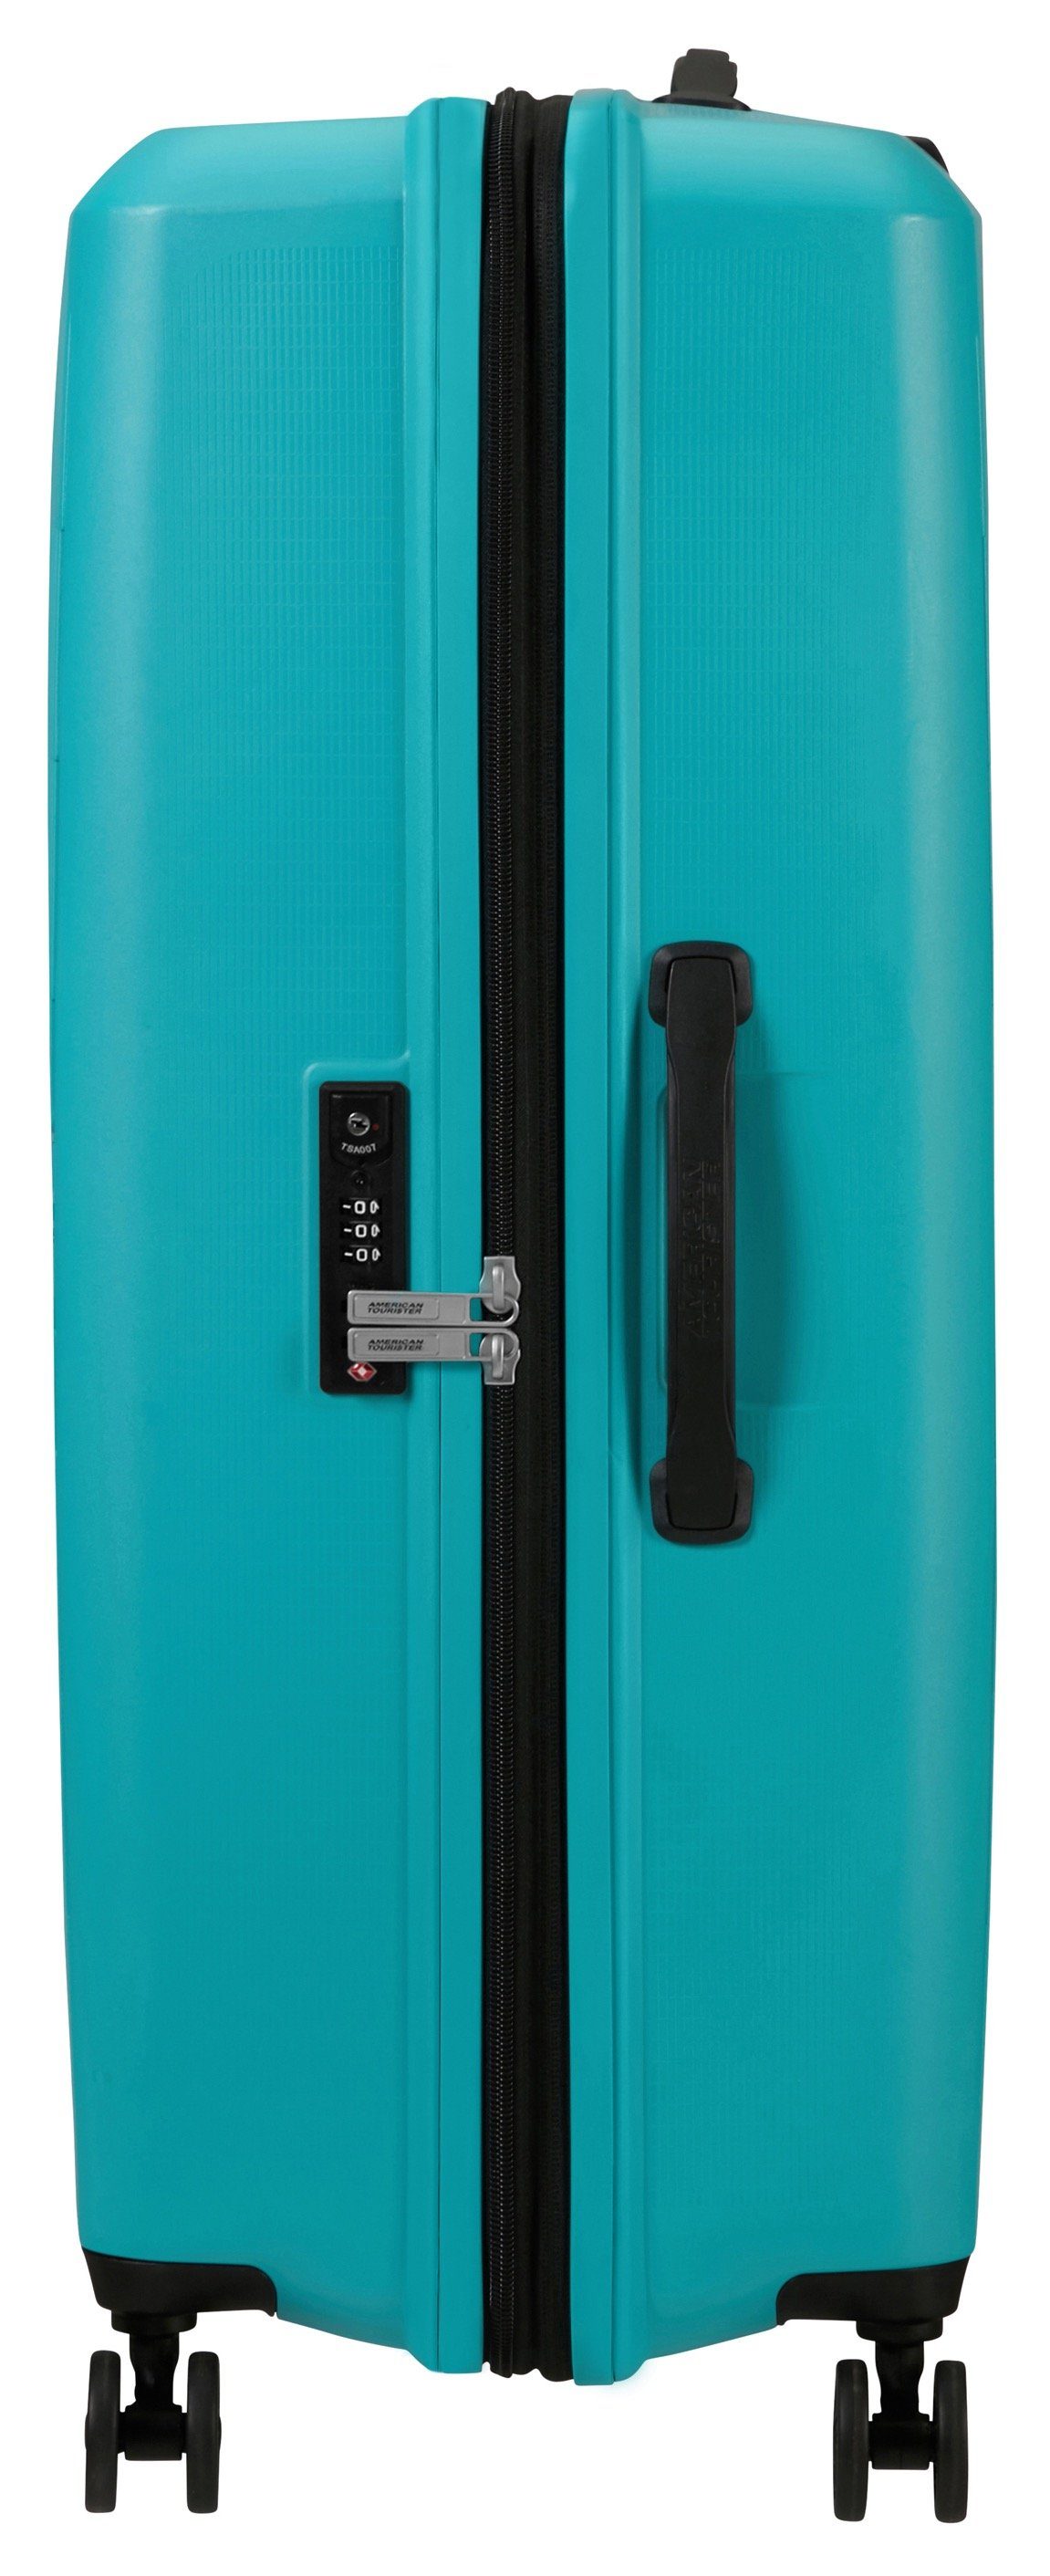 Spinner American Tourister® Koffer 4 exp, tonic 77 AEROSTEP turquoise Rollen